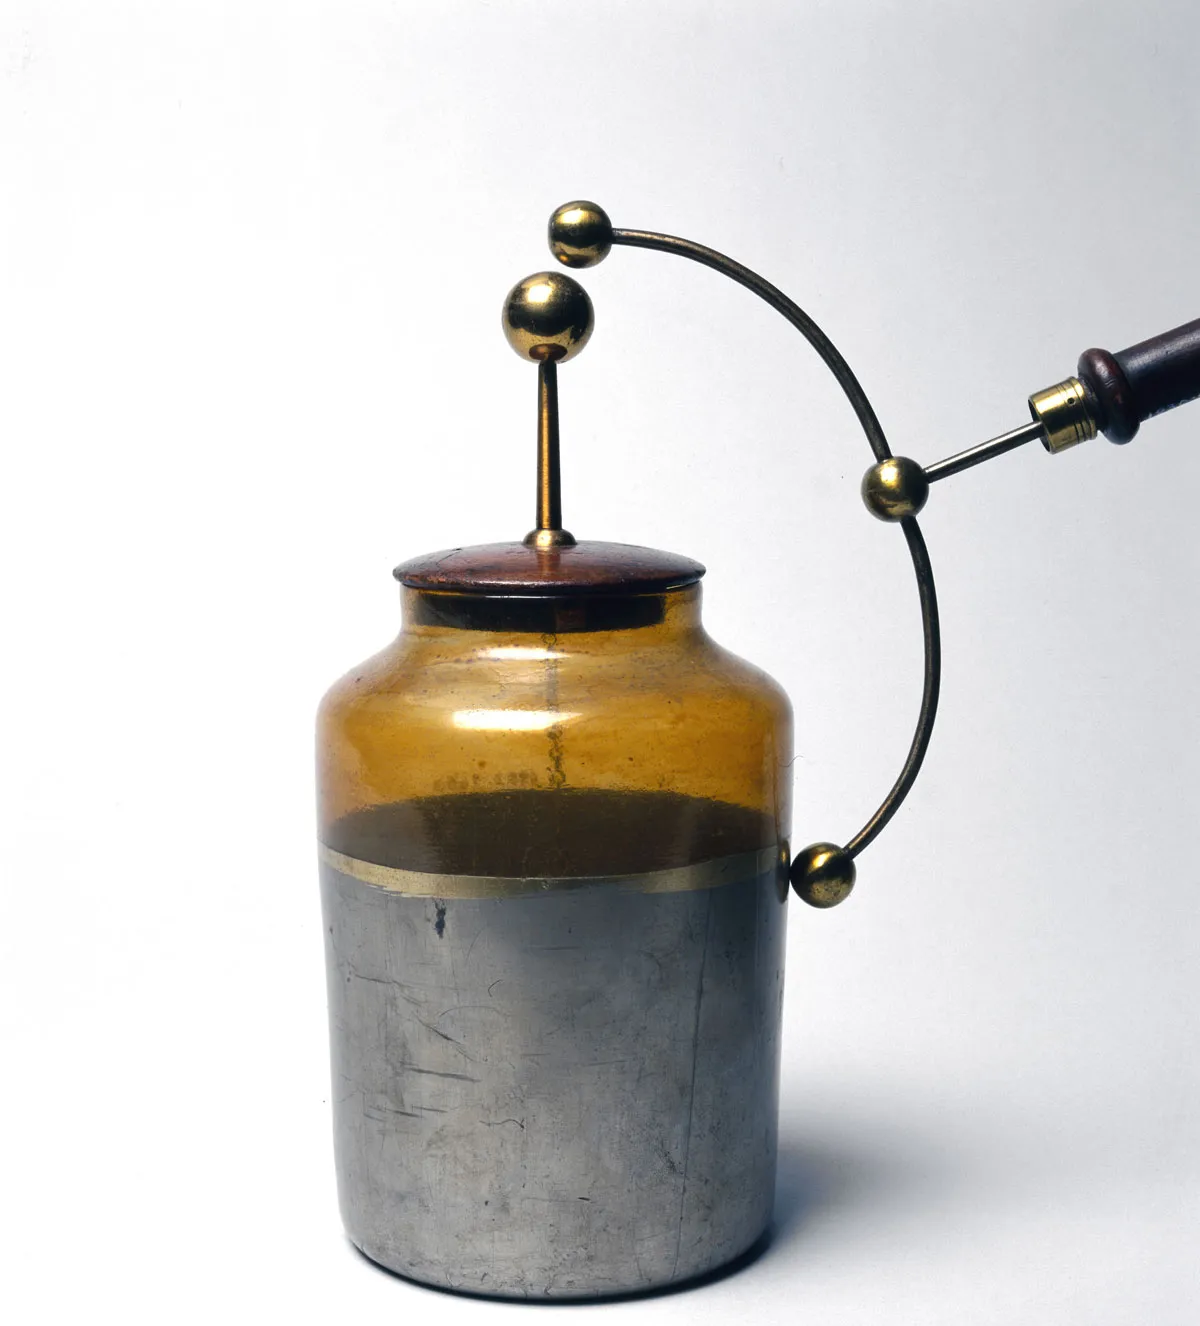 The Leyden jar was an early capacitor, or a device for storing an electric charge. Photo by SSPL/Getty Images)